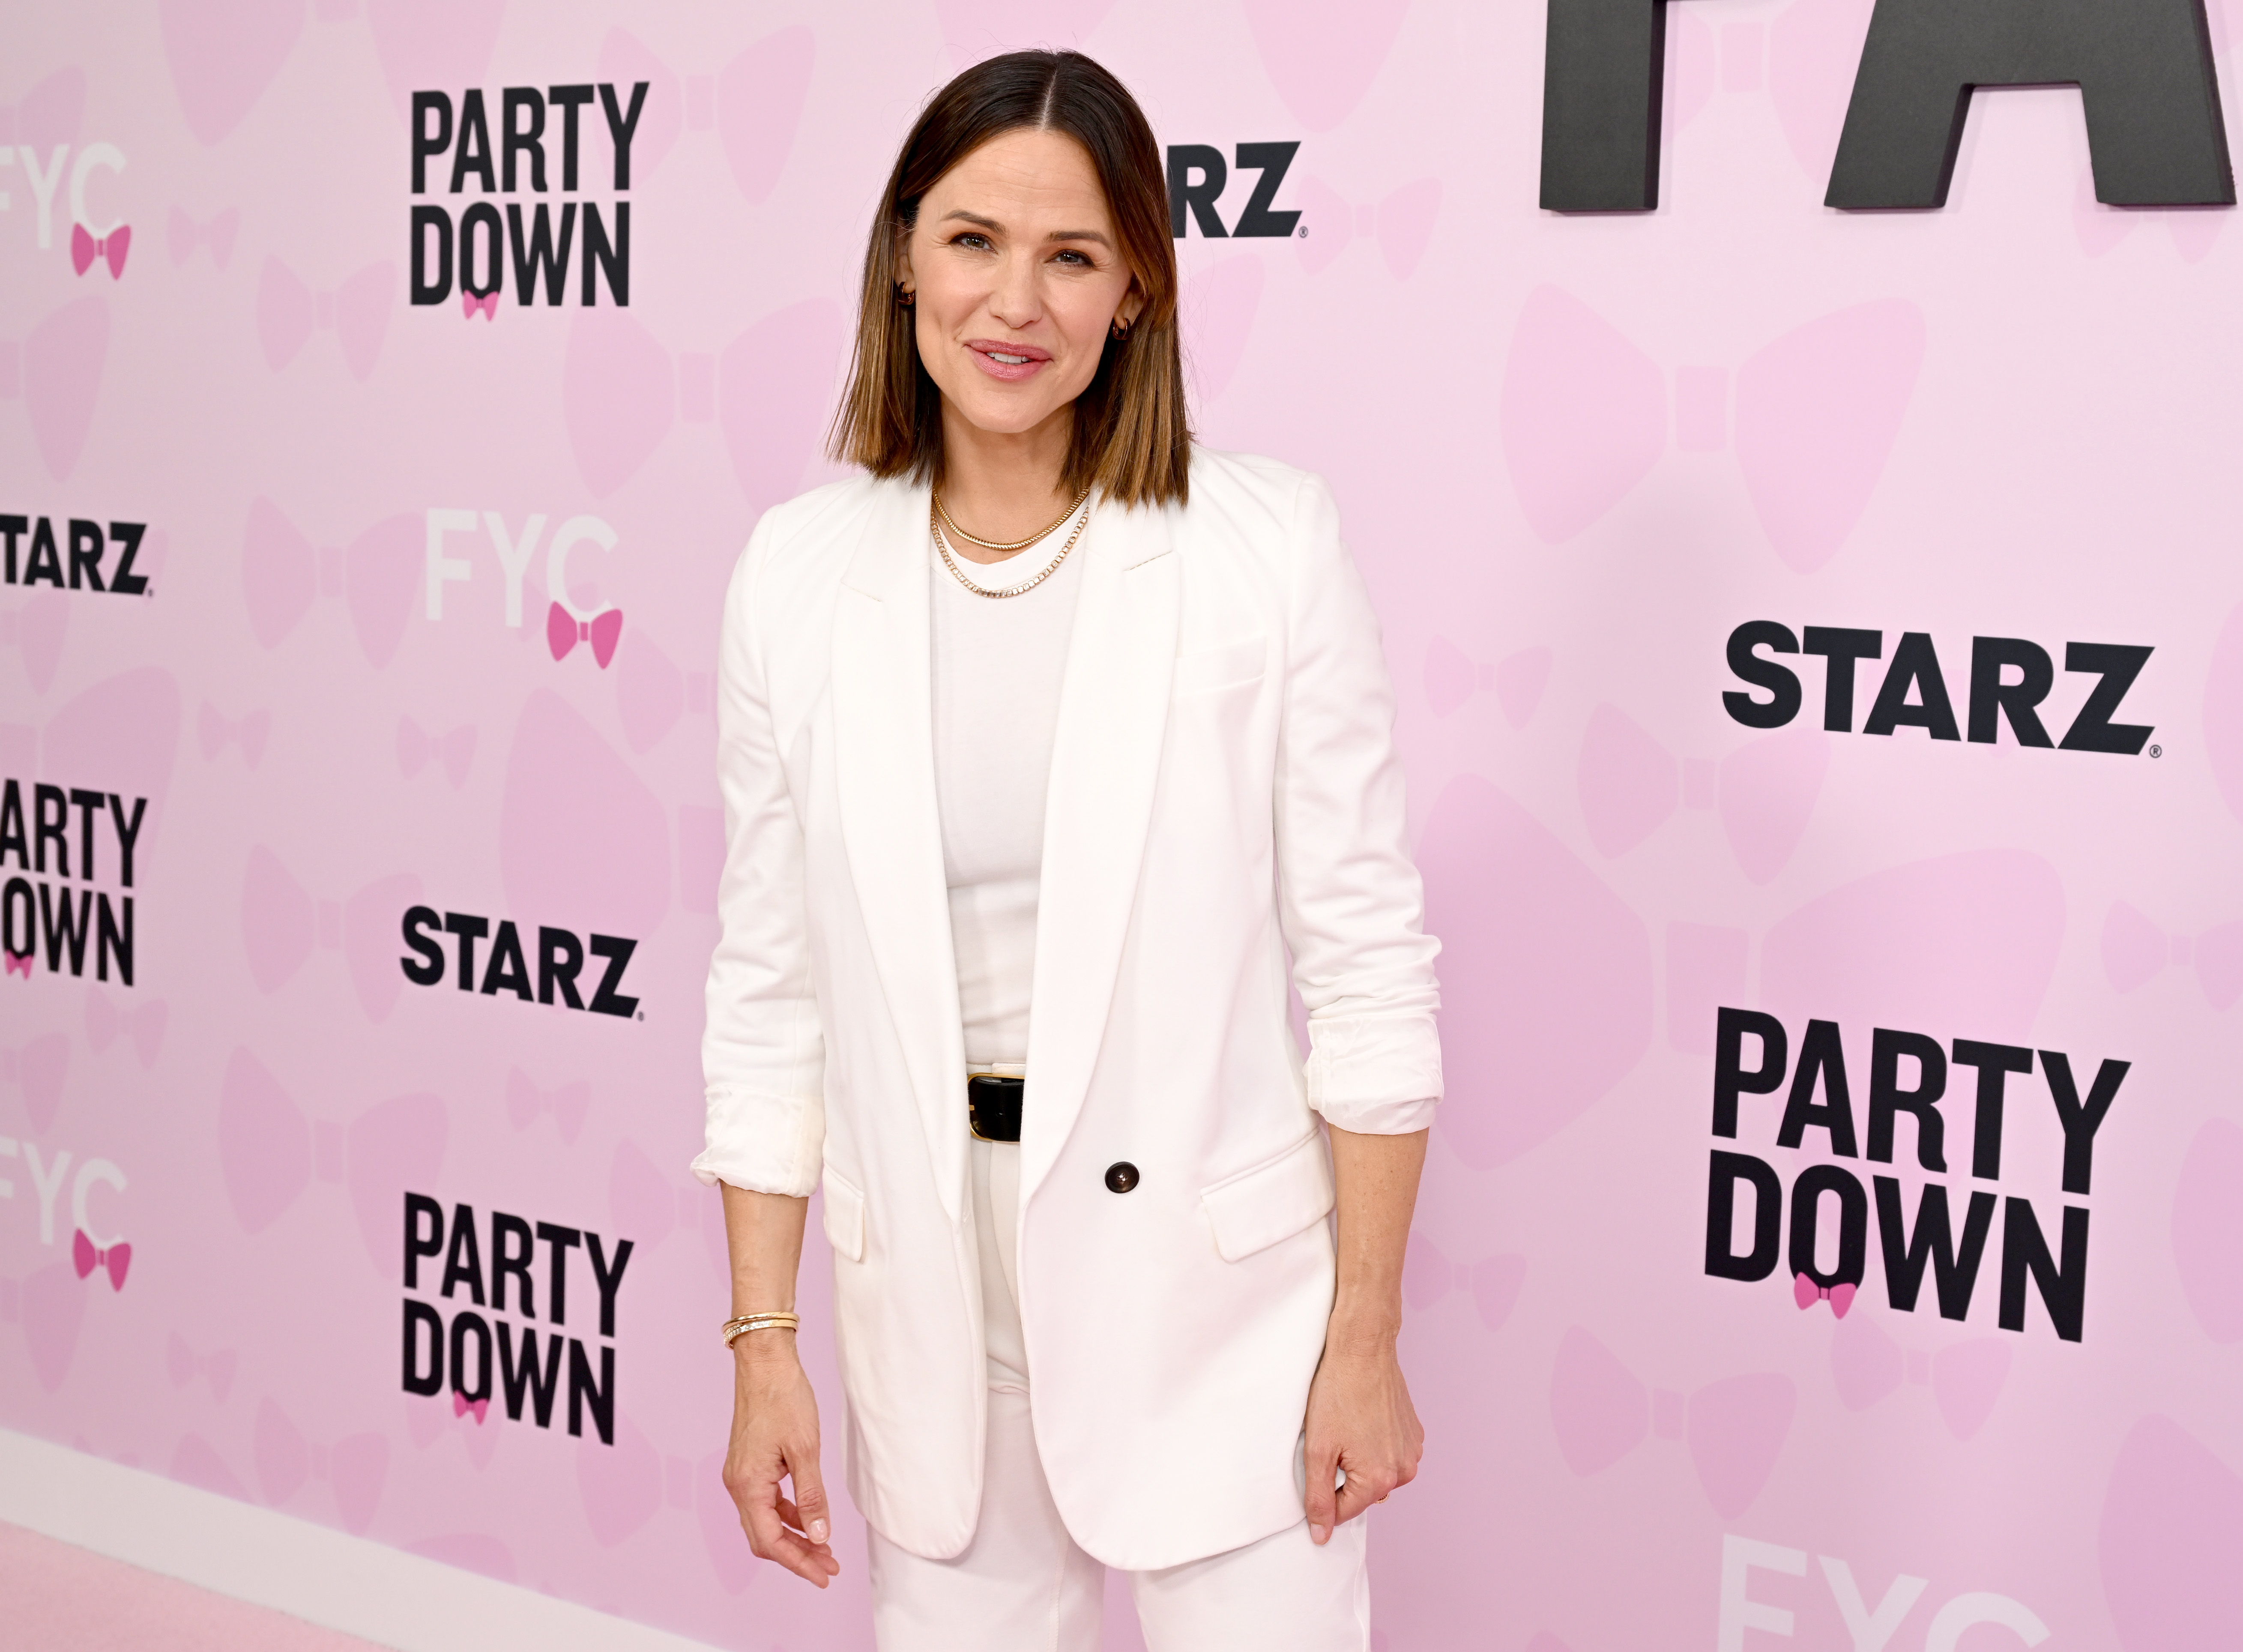 Jennifer Garner at the "Party Down" FYC event in Hollywood, California on June 3, 2023 | Source: Getty Images